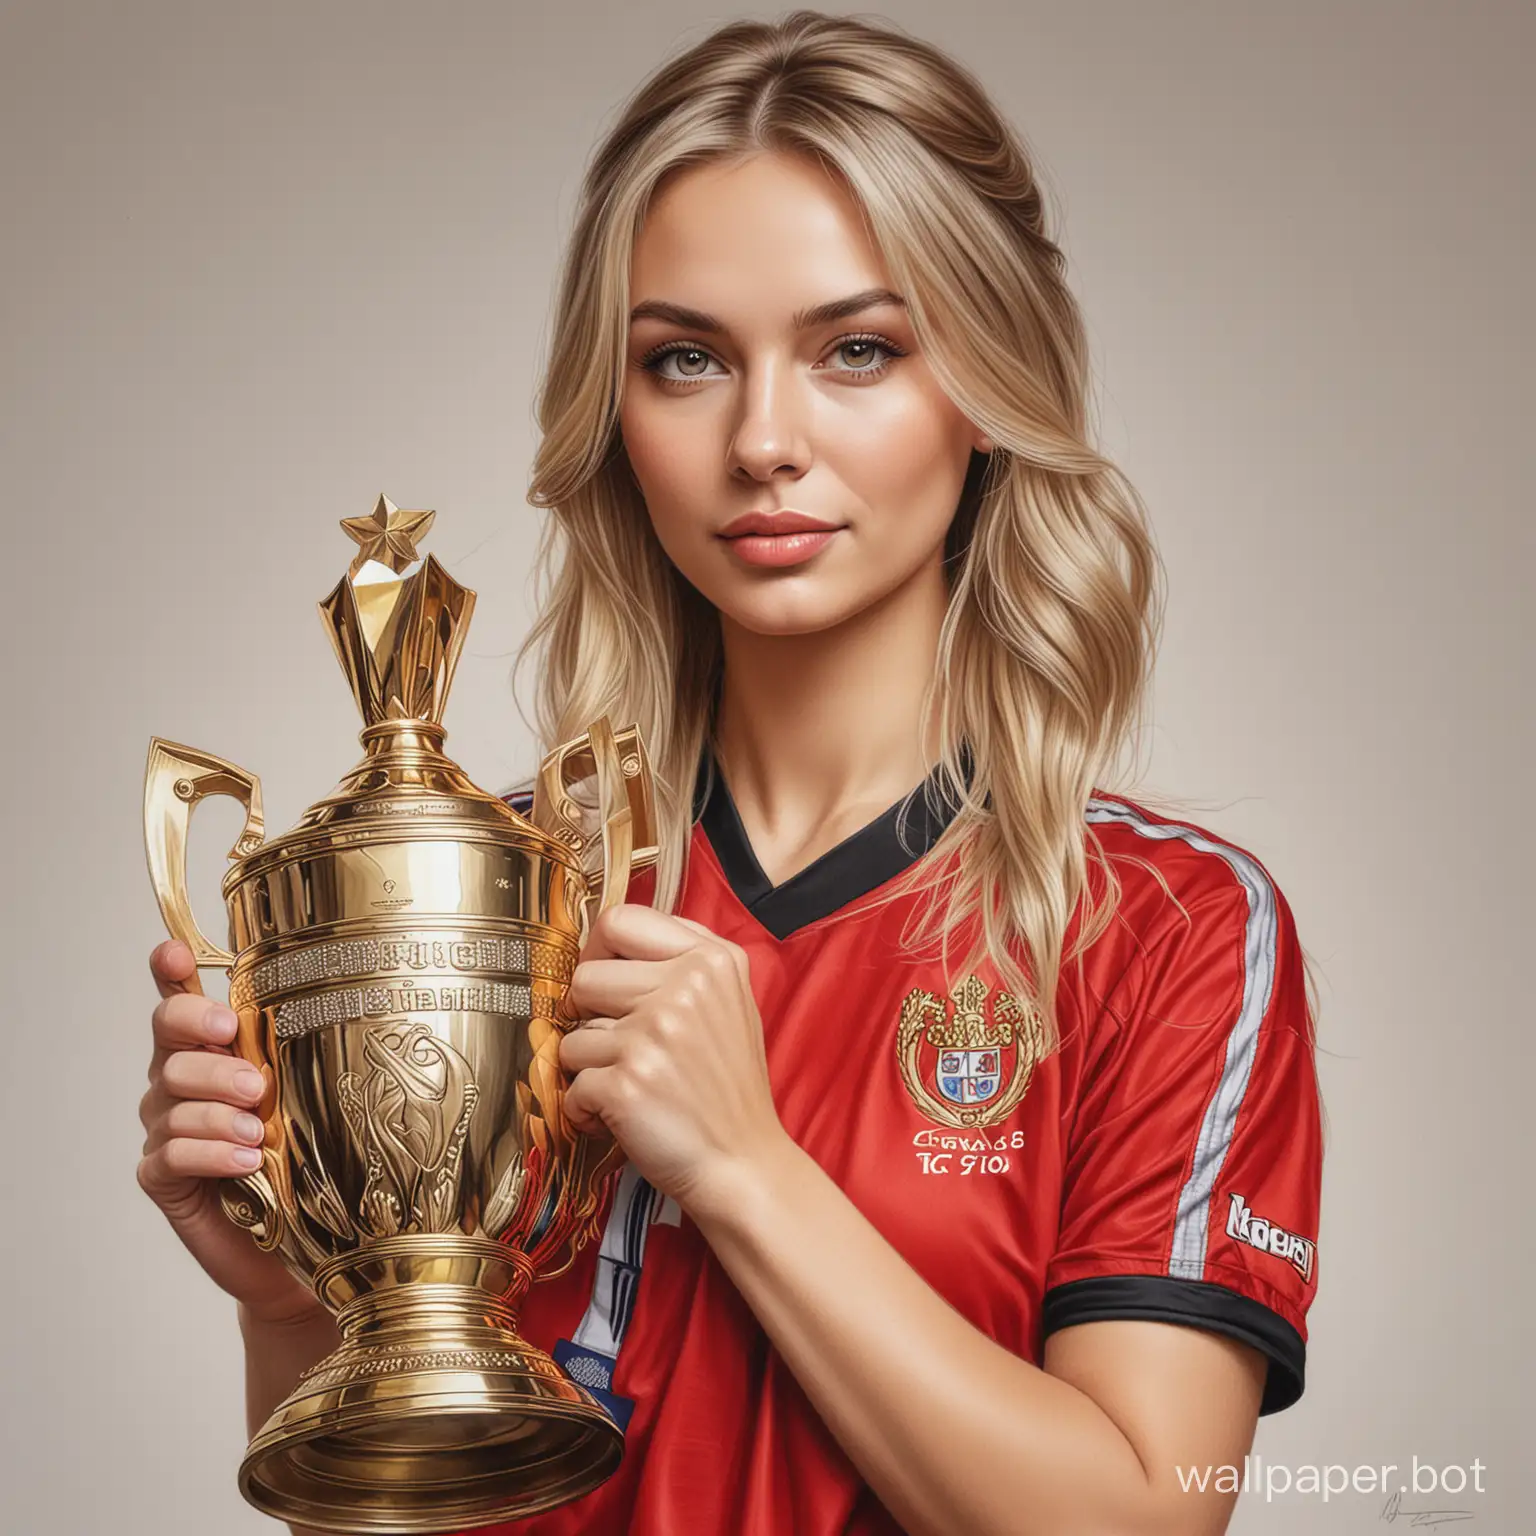 Sketch Irina Chashchina, 25 years old, light hair, cup size 7, narrow waist, in red and black soccer uniform, holding the big Champions Cup on a white background, very realistic drawing colored pencil.